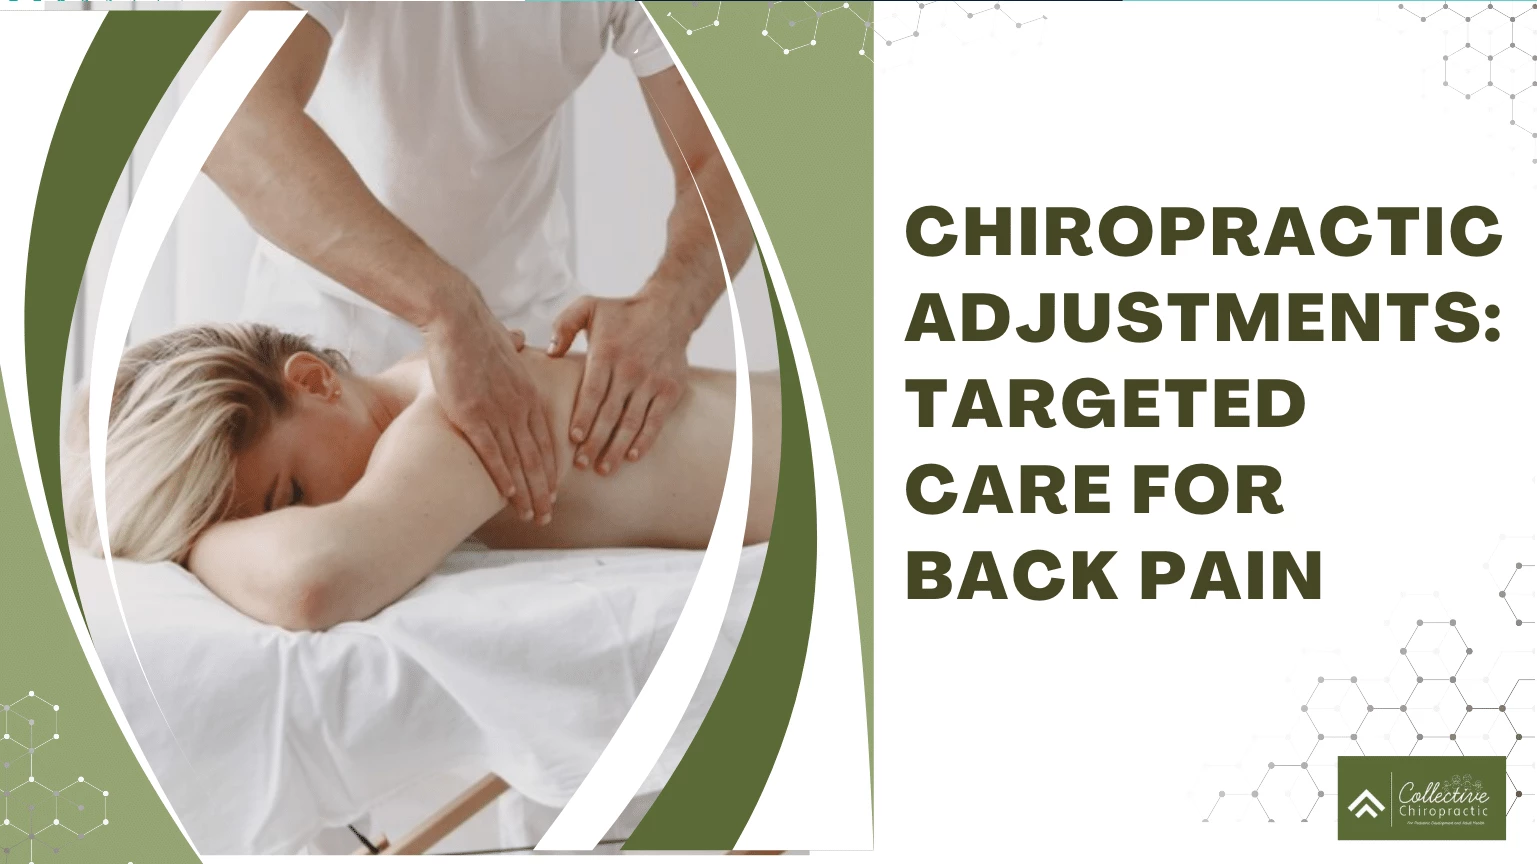 Chiropractic Adjustments Targeted Care for Back Pain